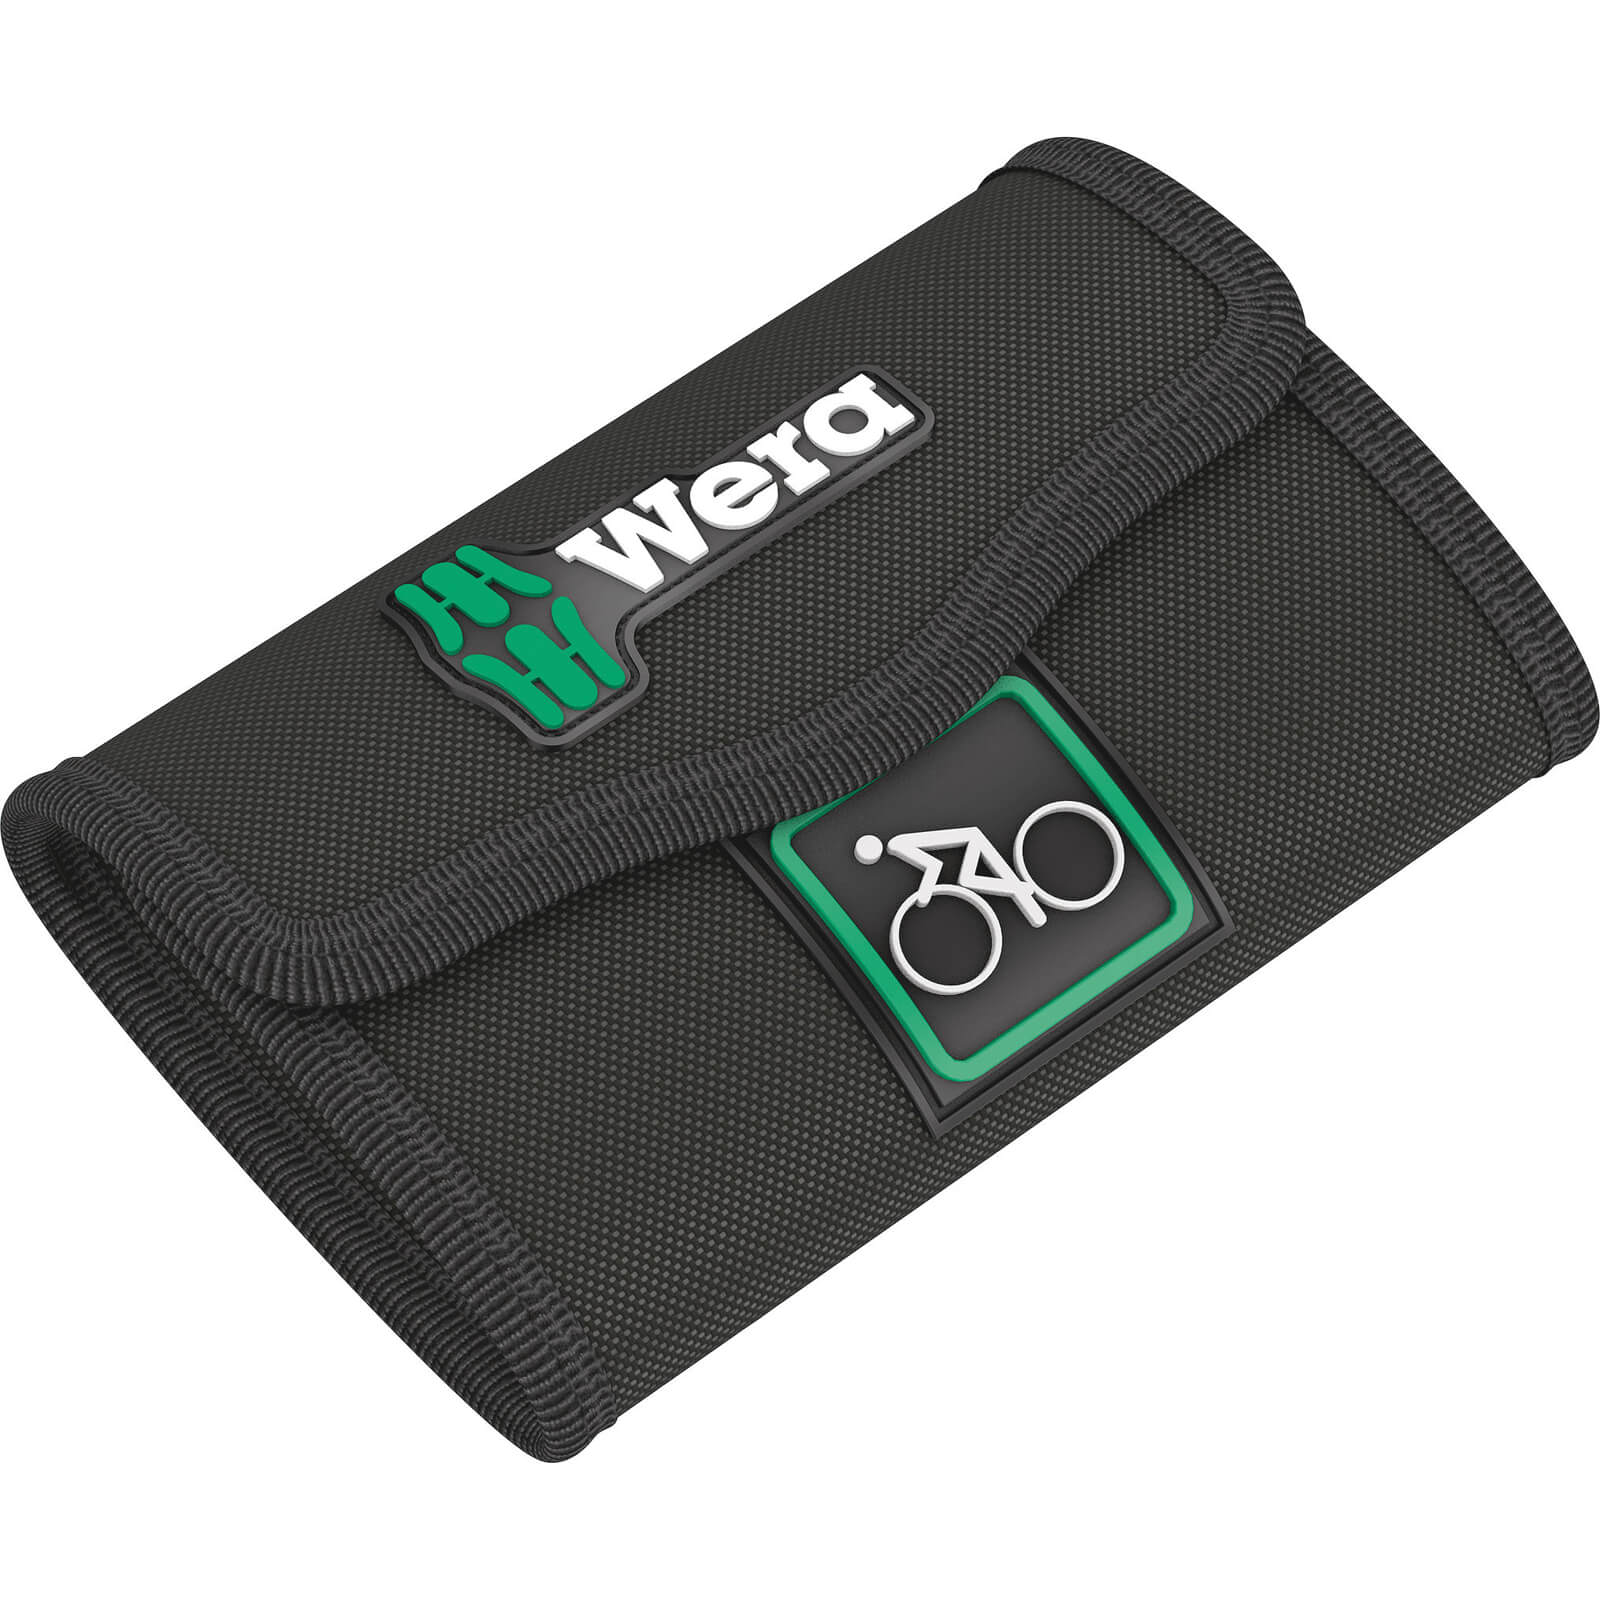 Wera 9431 2Go Folding Bicycle Tool Kit Pouch